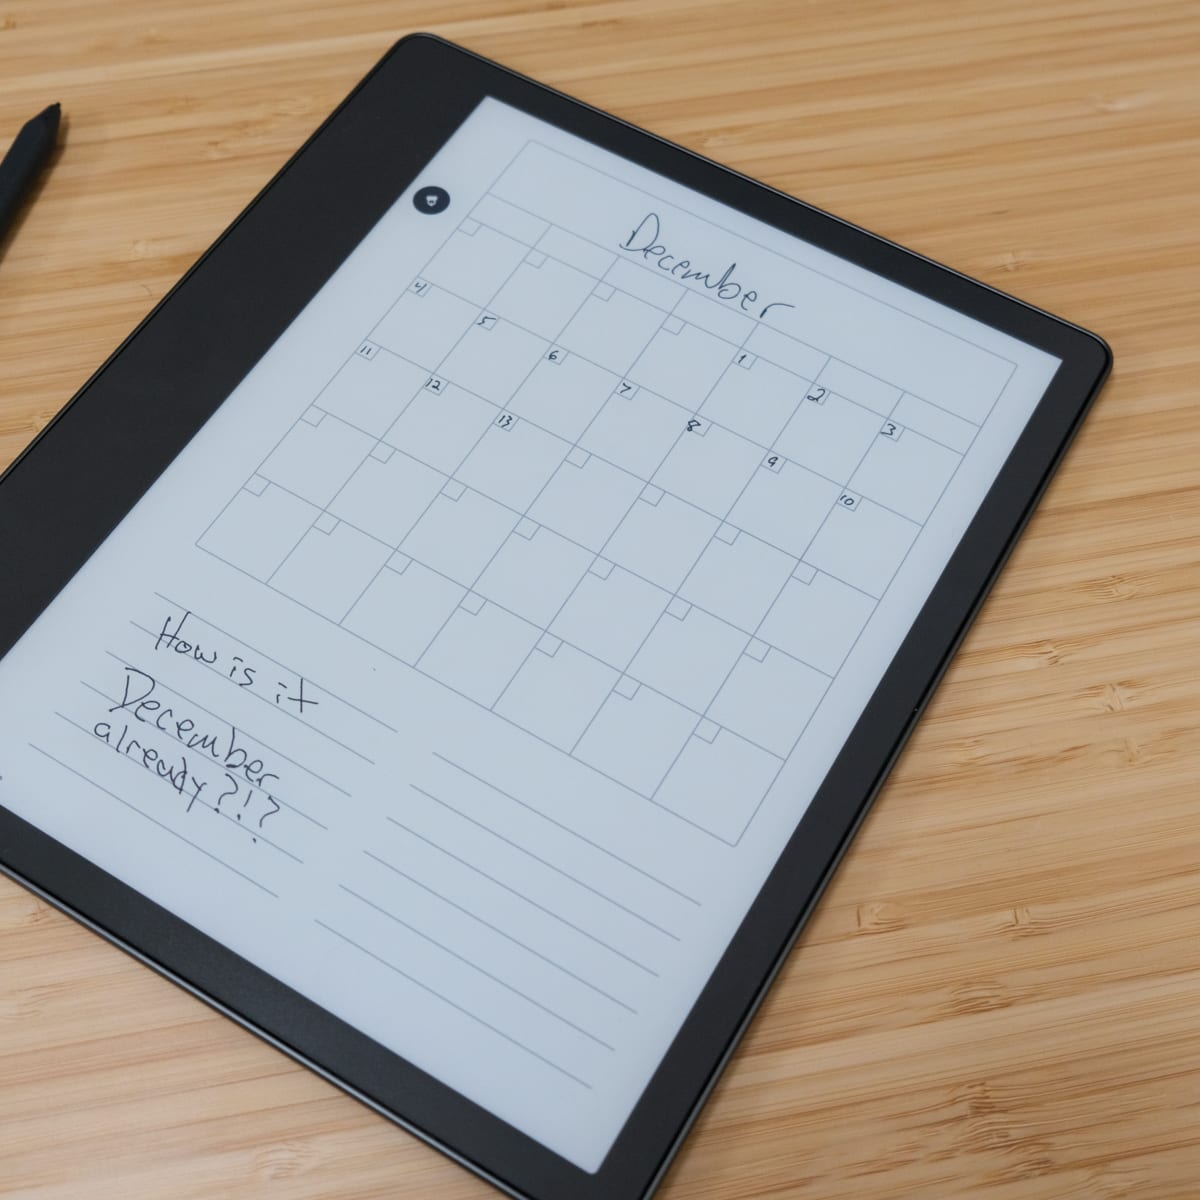 Kindle Scribe brings writing to 's popular e-reader